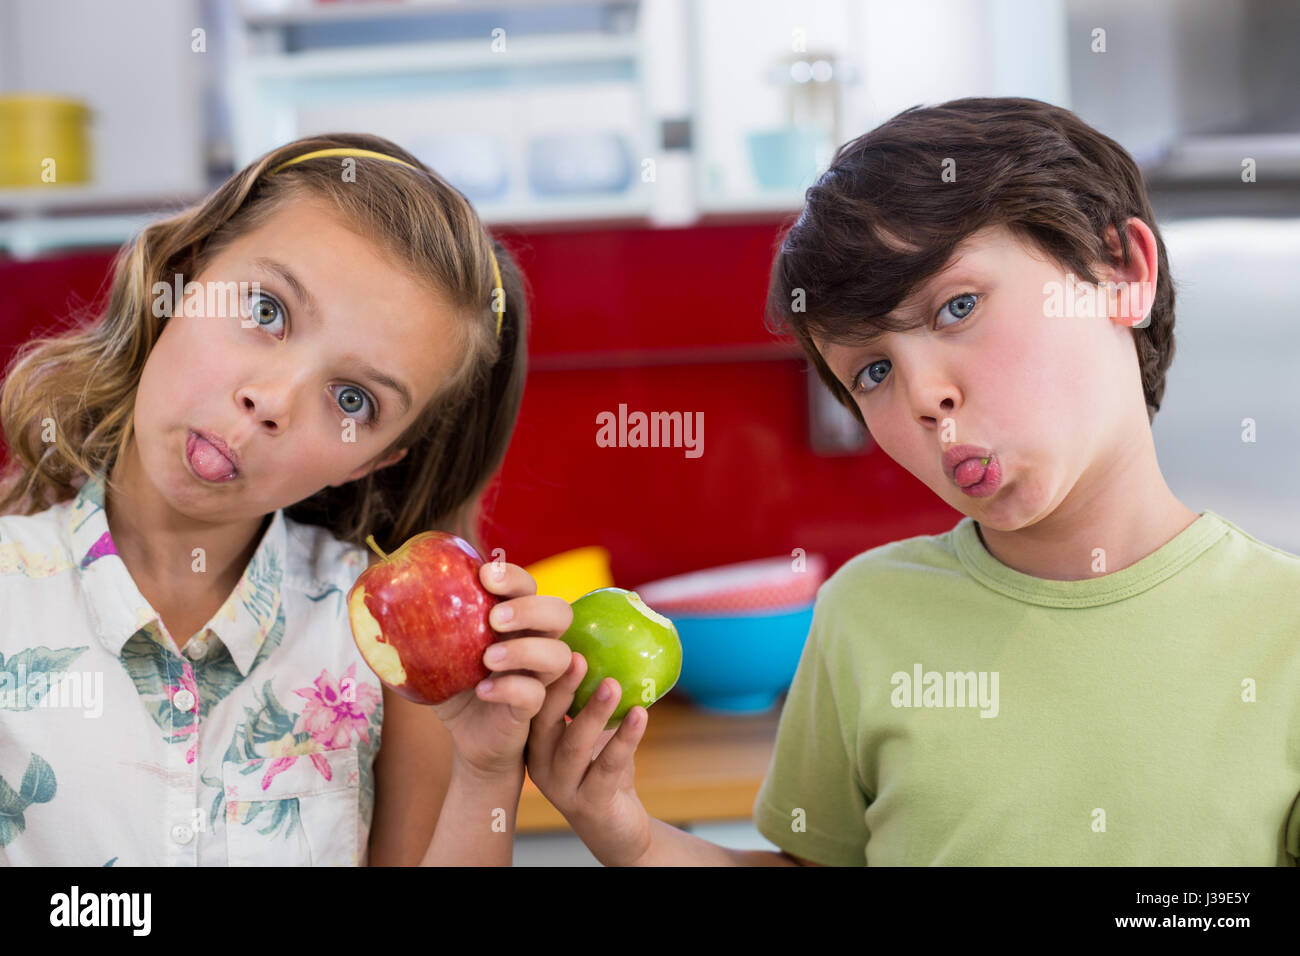 Siblings holding apple and pulling funny faces in kitchen at home Stock Photo